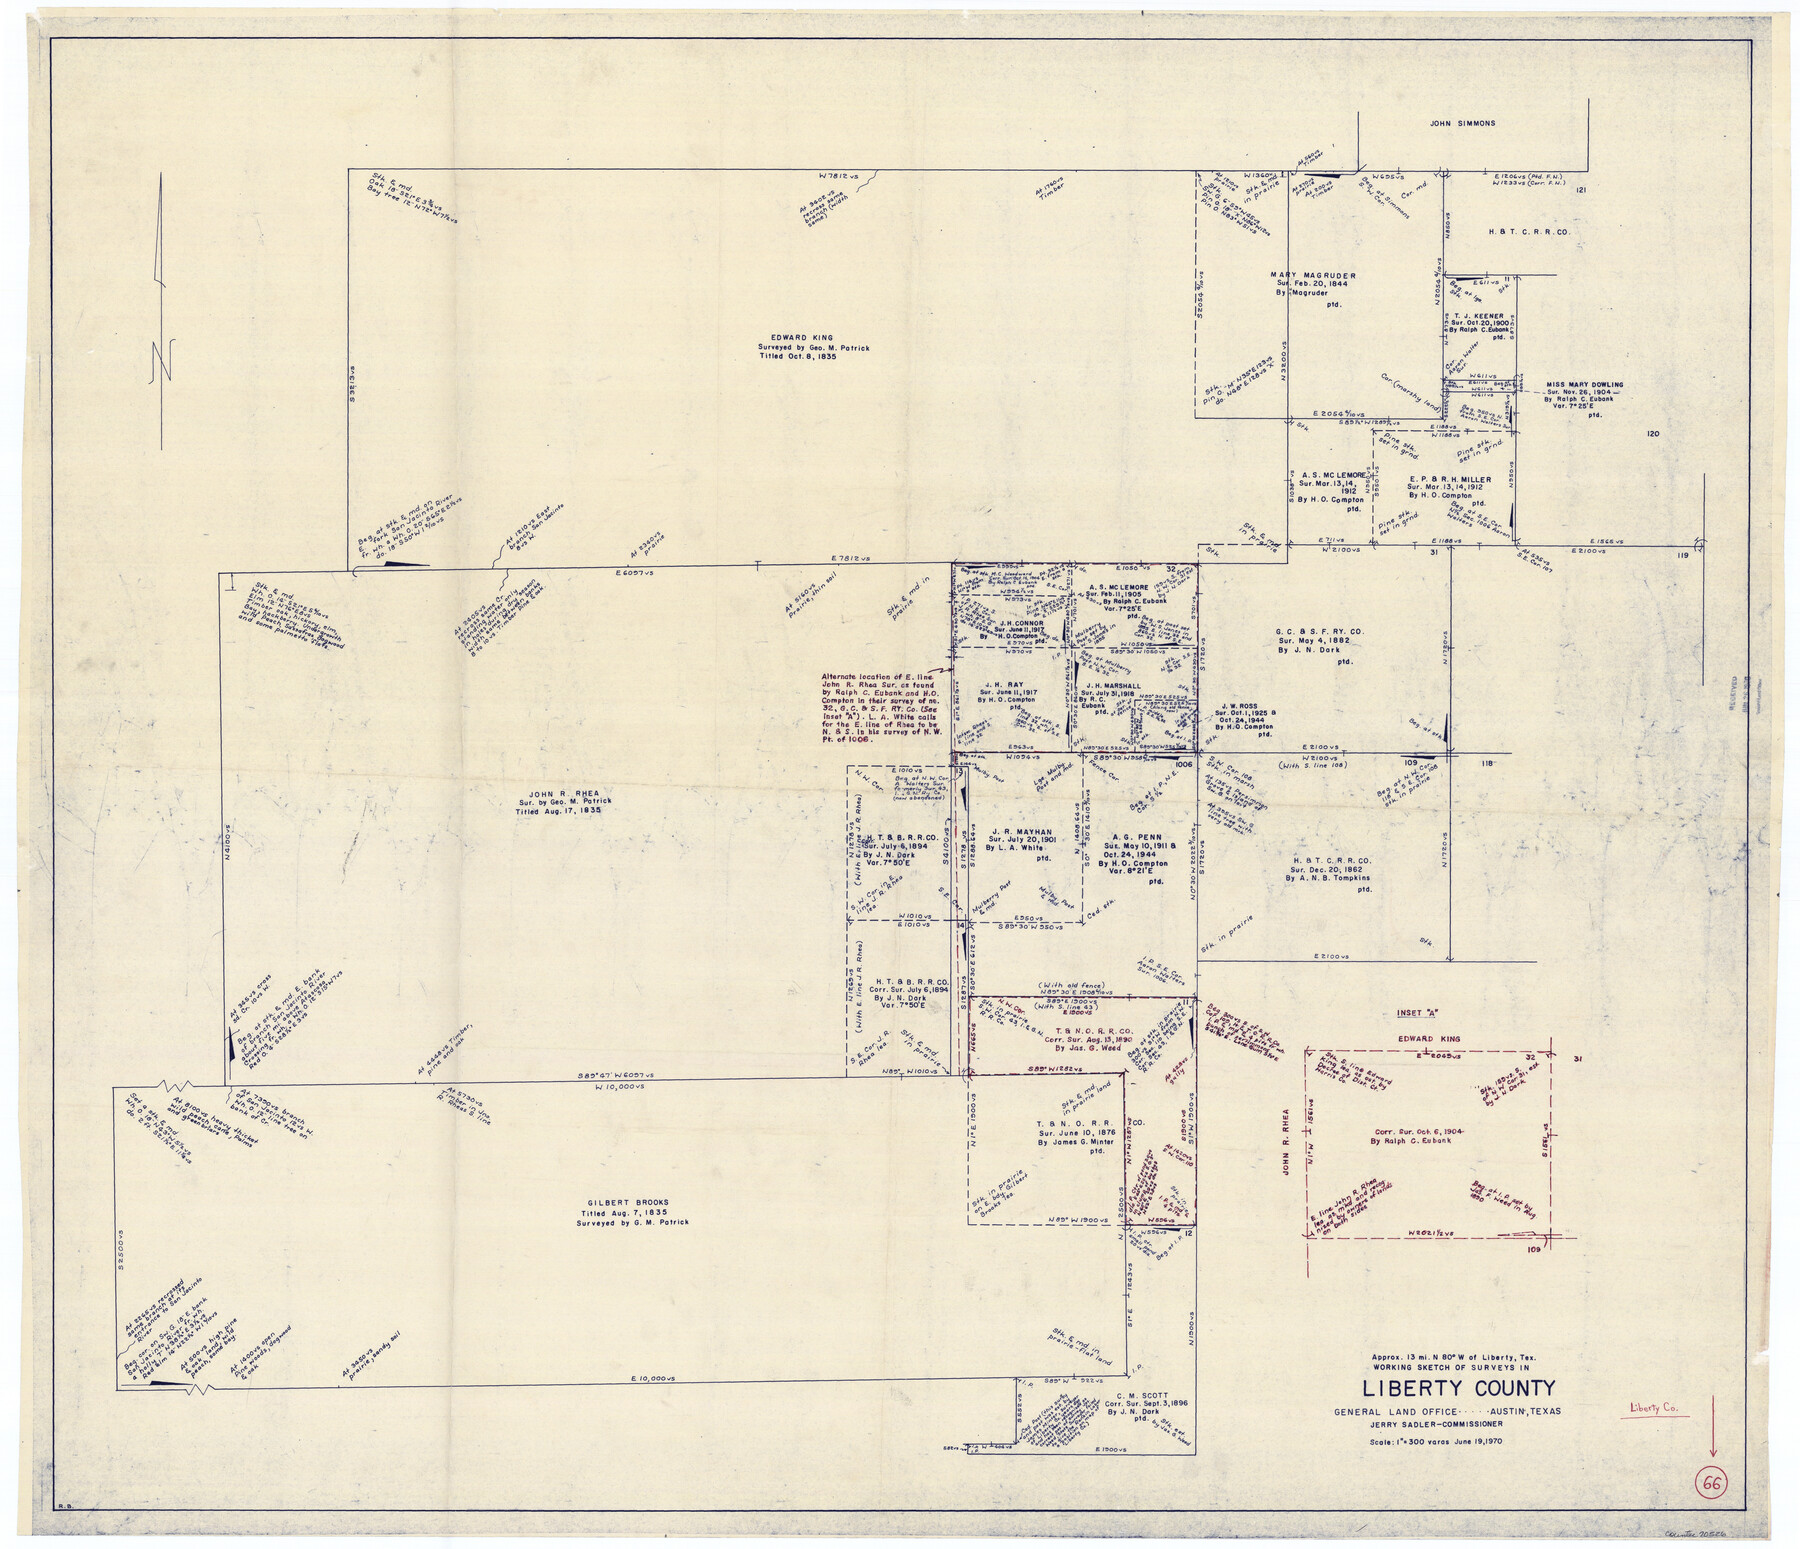 70526, Liberty County Working Sketch 66, General Map Collection